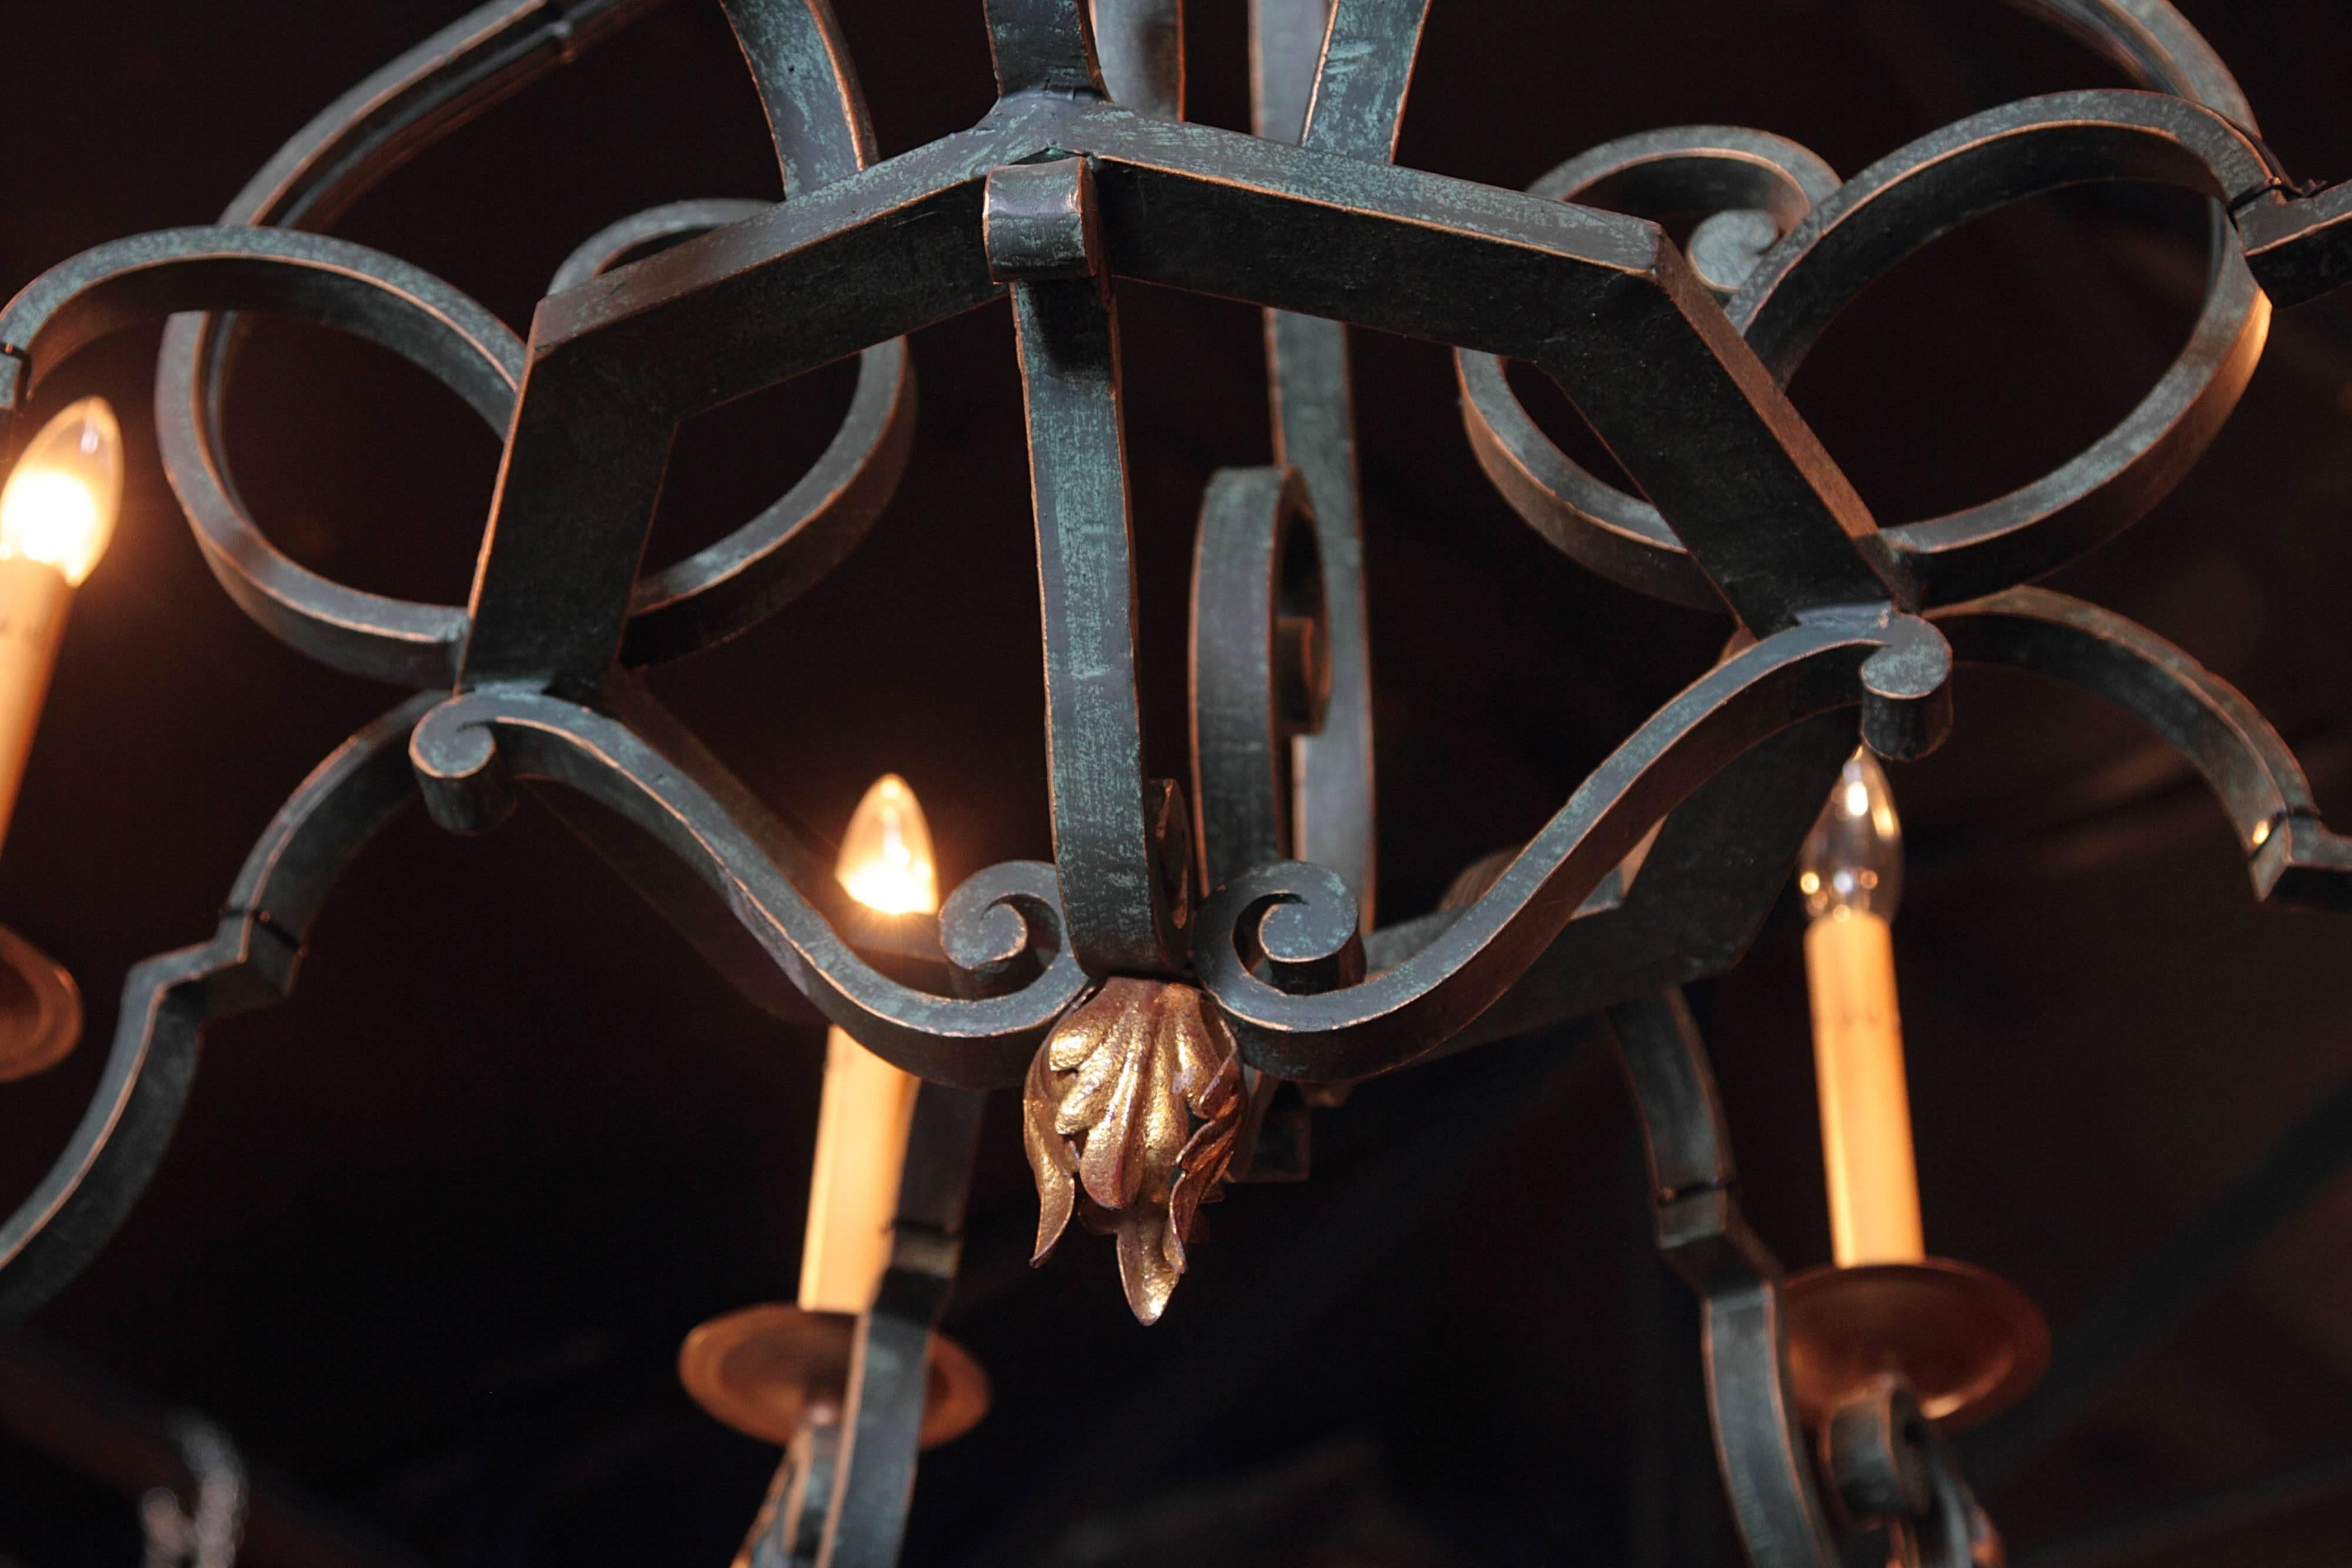 Wrought Iron Mid-20th Century French Iron Eight-Light Chandelier with Verdigris Finish